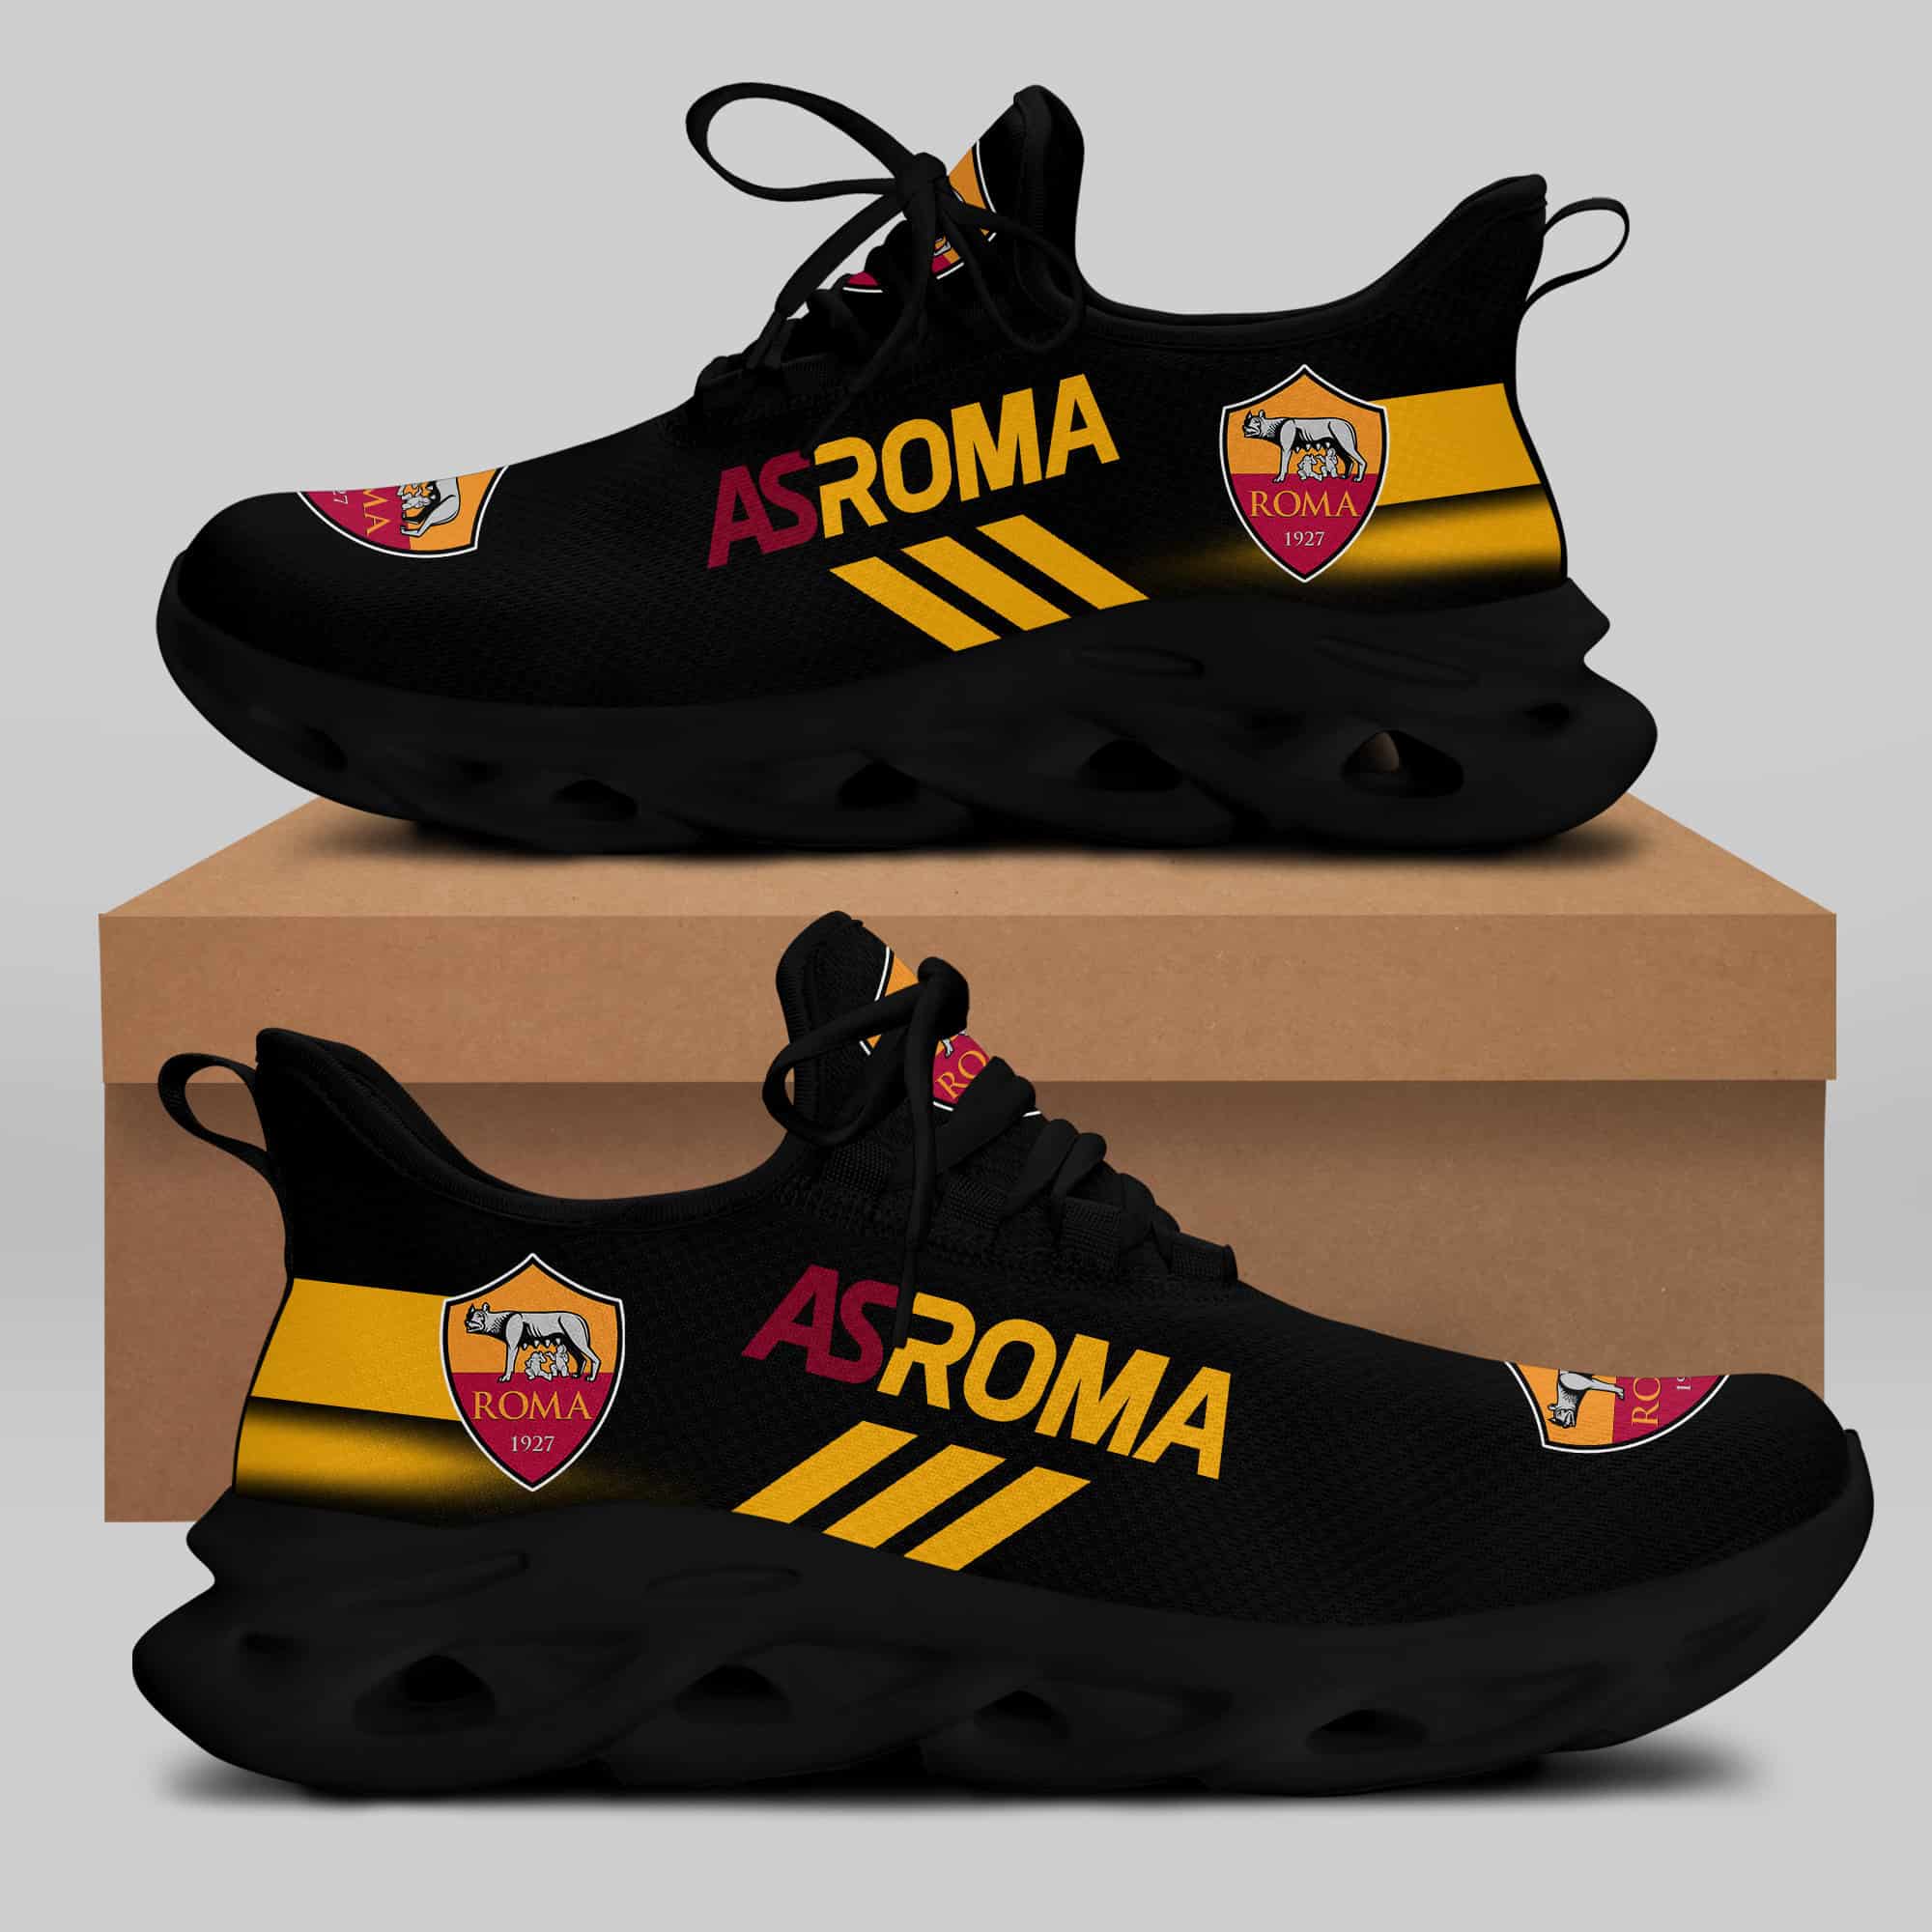 As Roma Running Shoes Max Soul Shoes Sneakers Ver 28 1